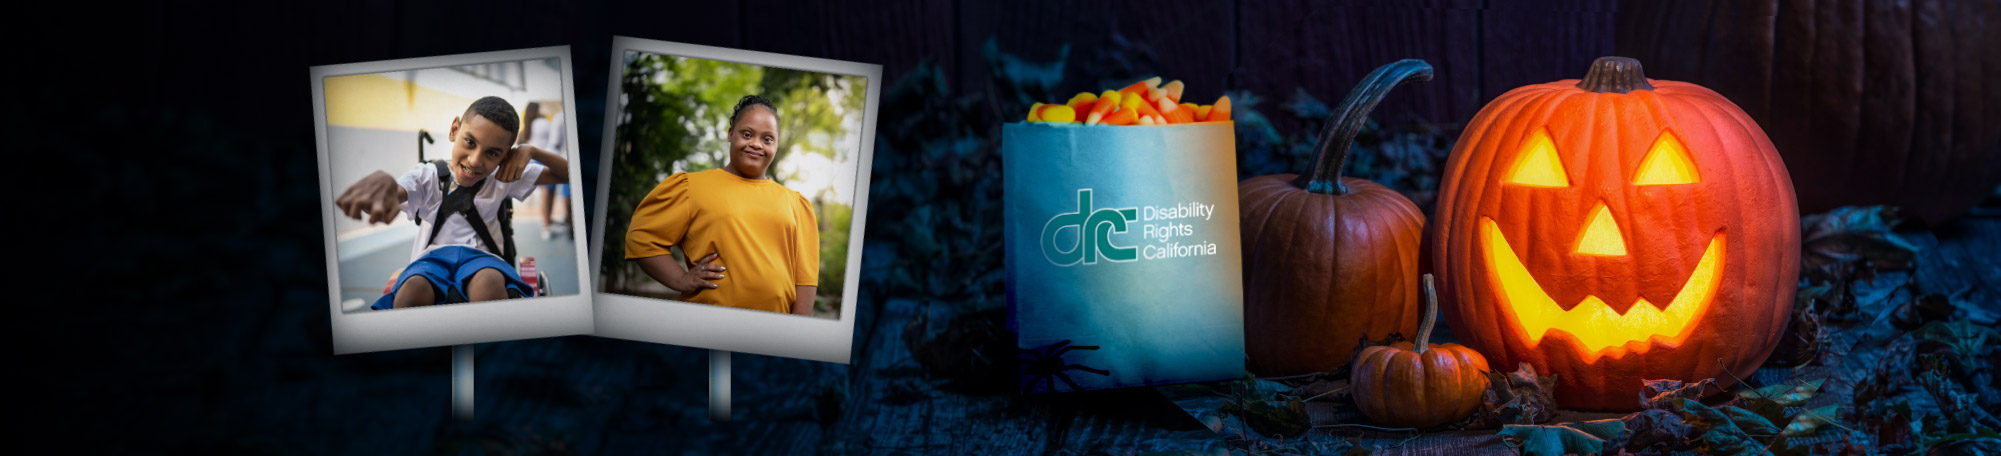 A photo go a front lawn at night with a jackolantern and a back of candy with the DRC logo on it. Next to it are two photos of people with different disabilities.